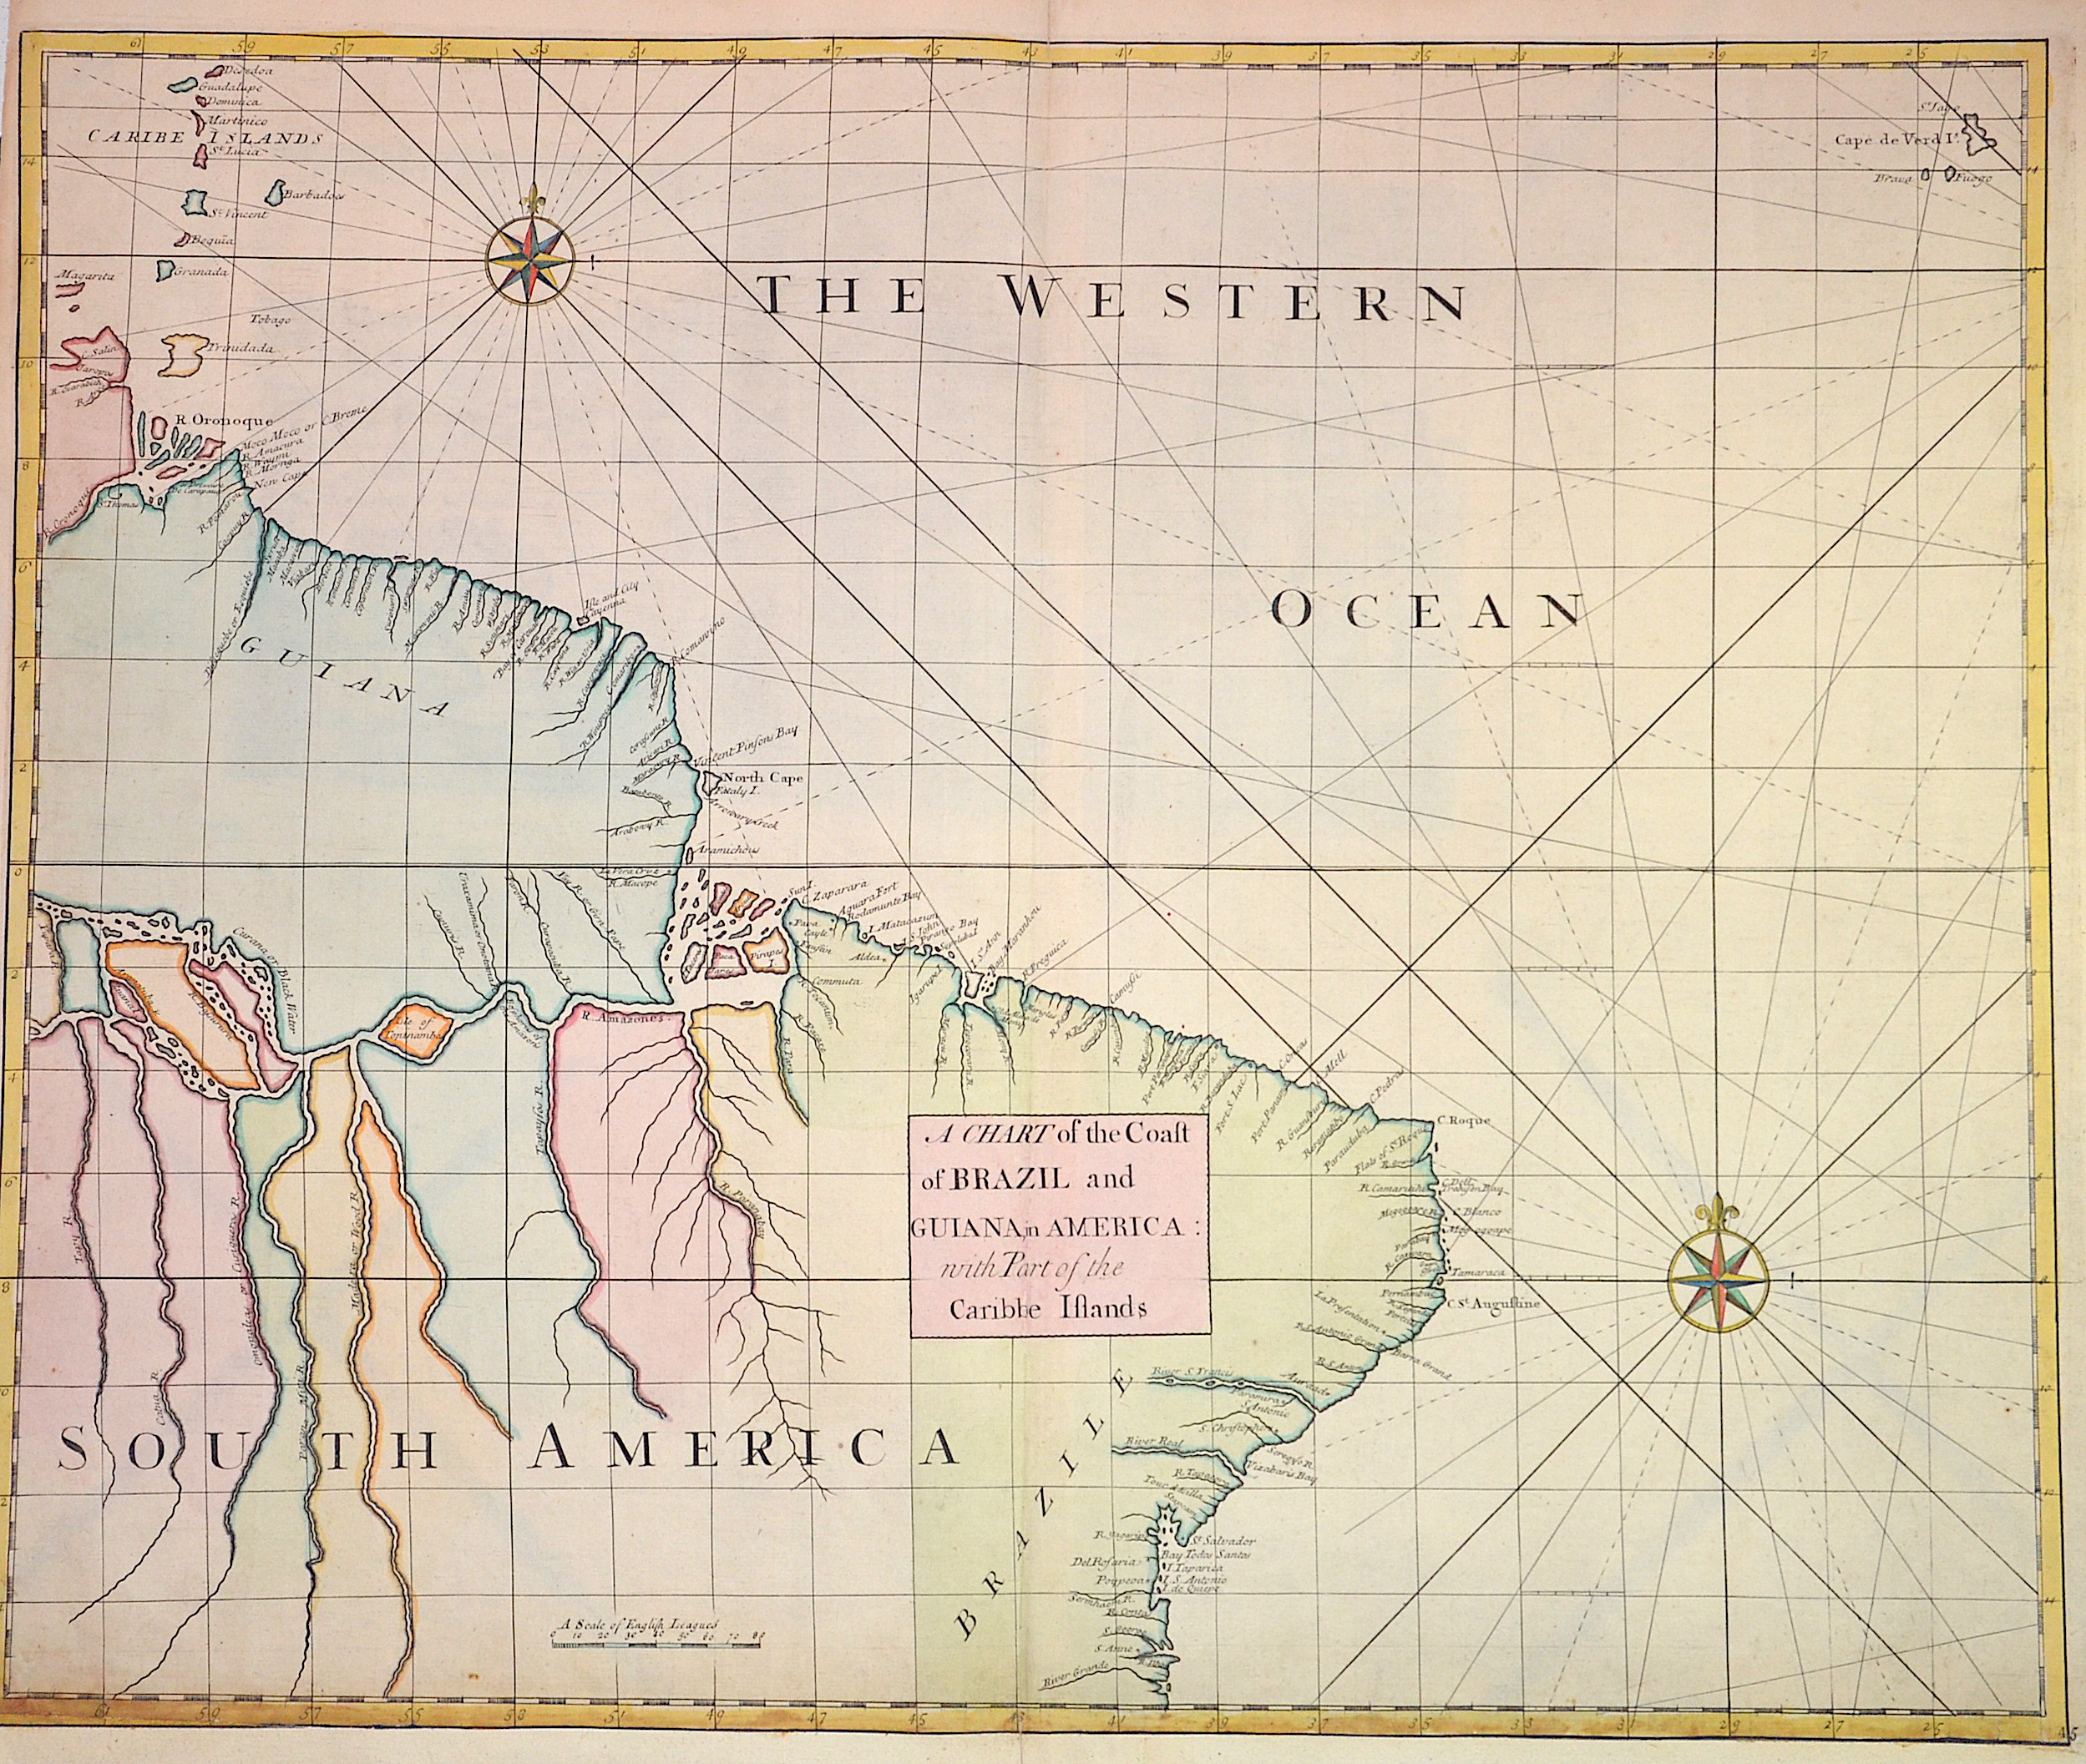 Senex John A chart of the coast of Brazil and Guiana in America with part of the Caribbe Islands